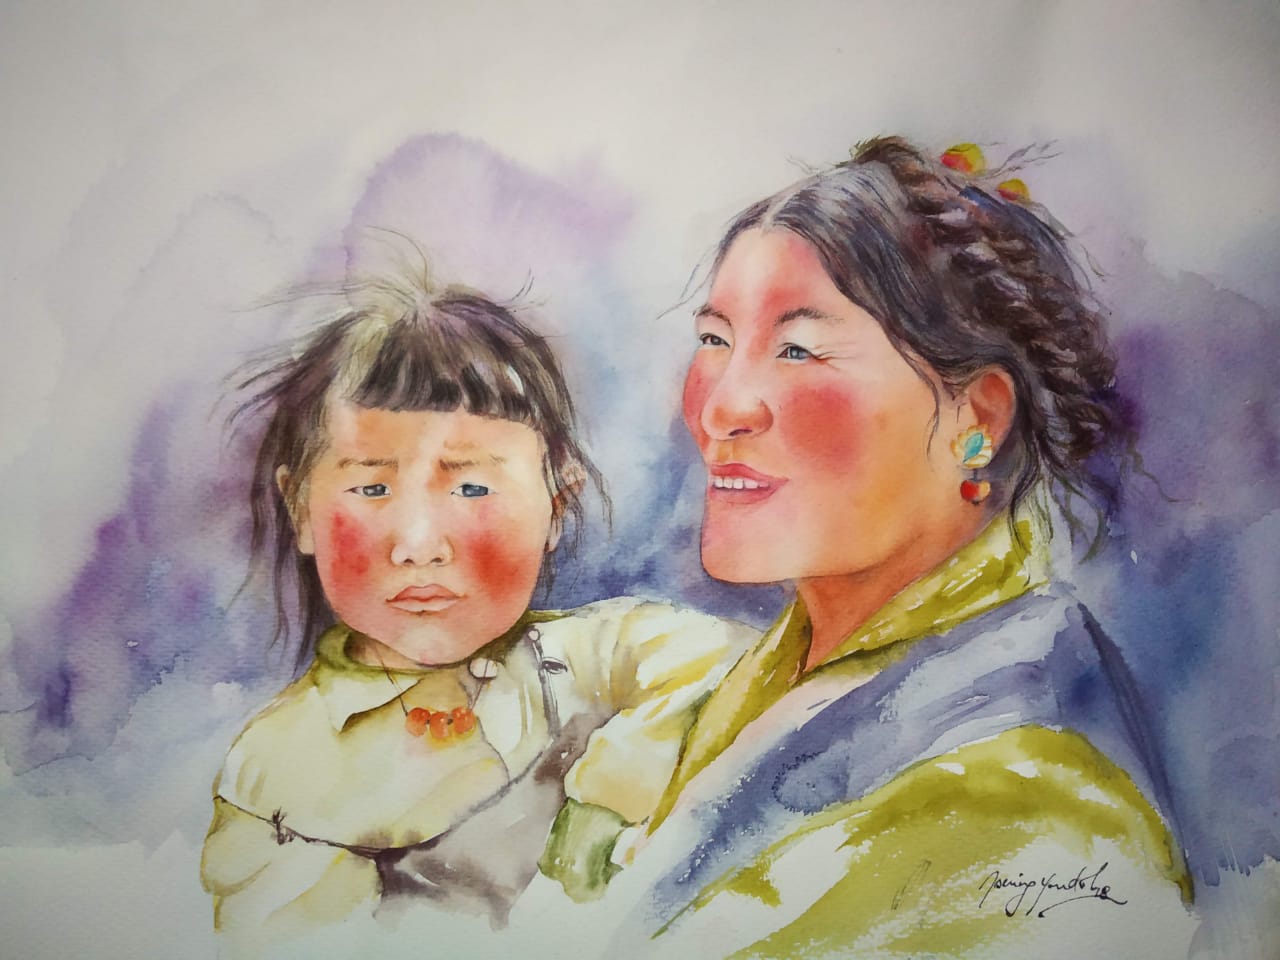 Portraiture Painting with Watercolor on Paper "Beloved" art by Tsering Youdol